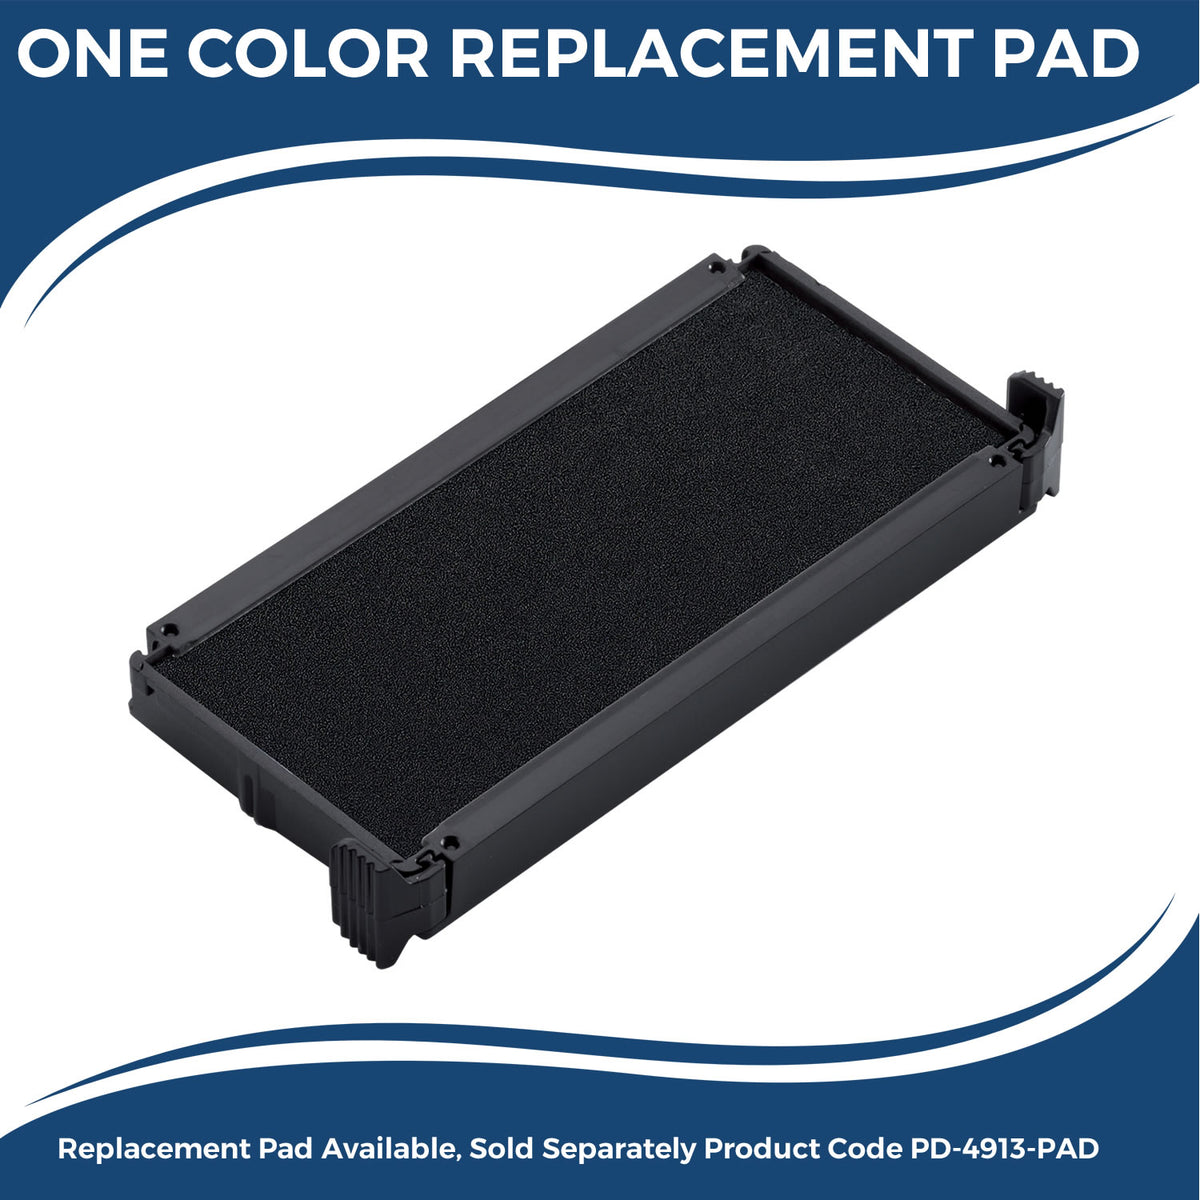 Large Self-Inking Confirmation of Phone Order Stamp 5642S Large Replacment Pad